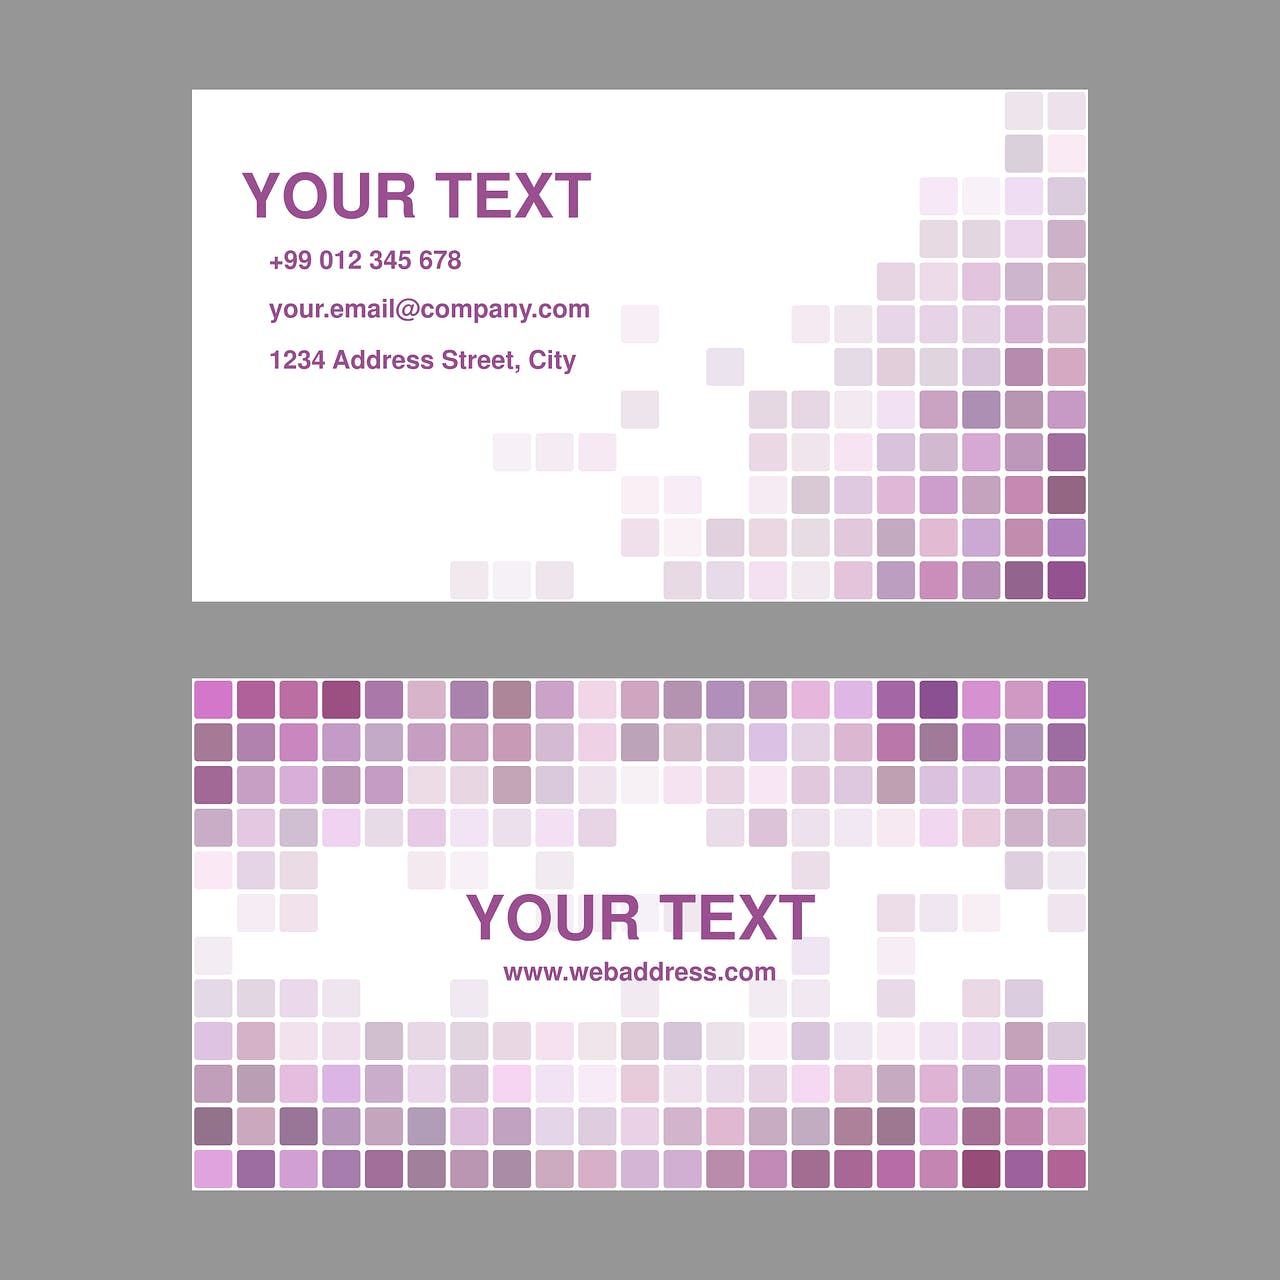 Business cards media 2